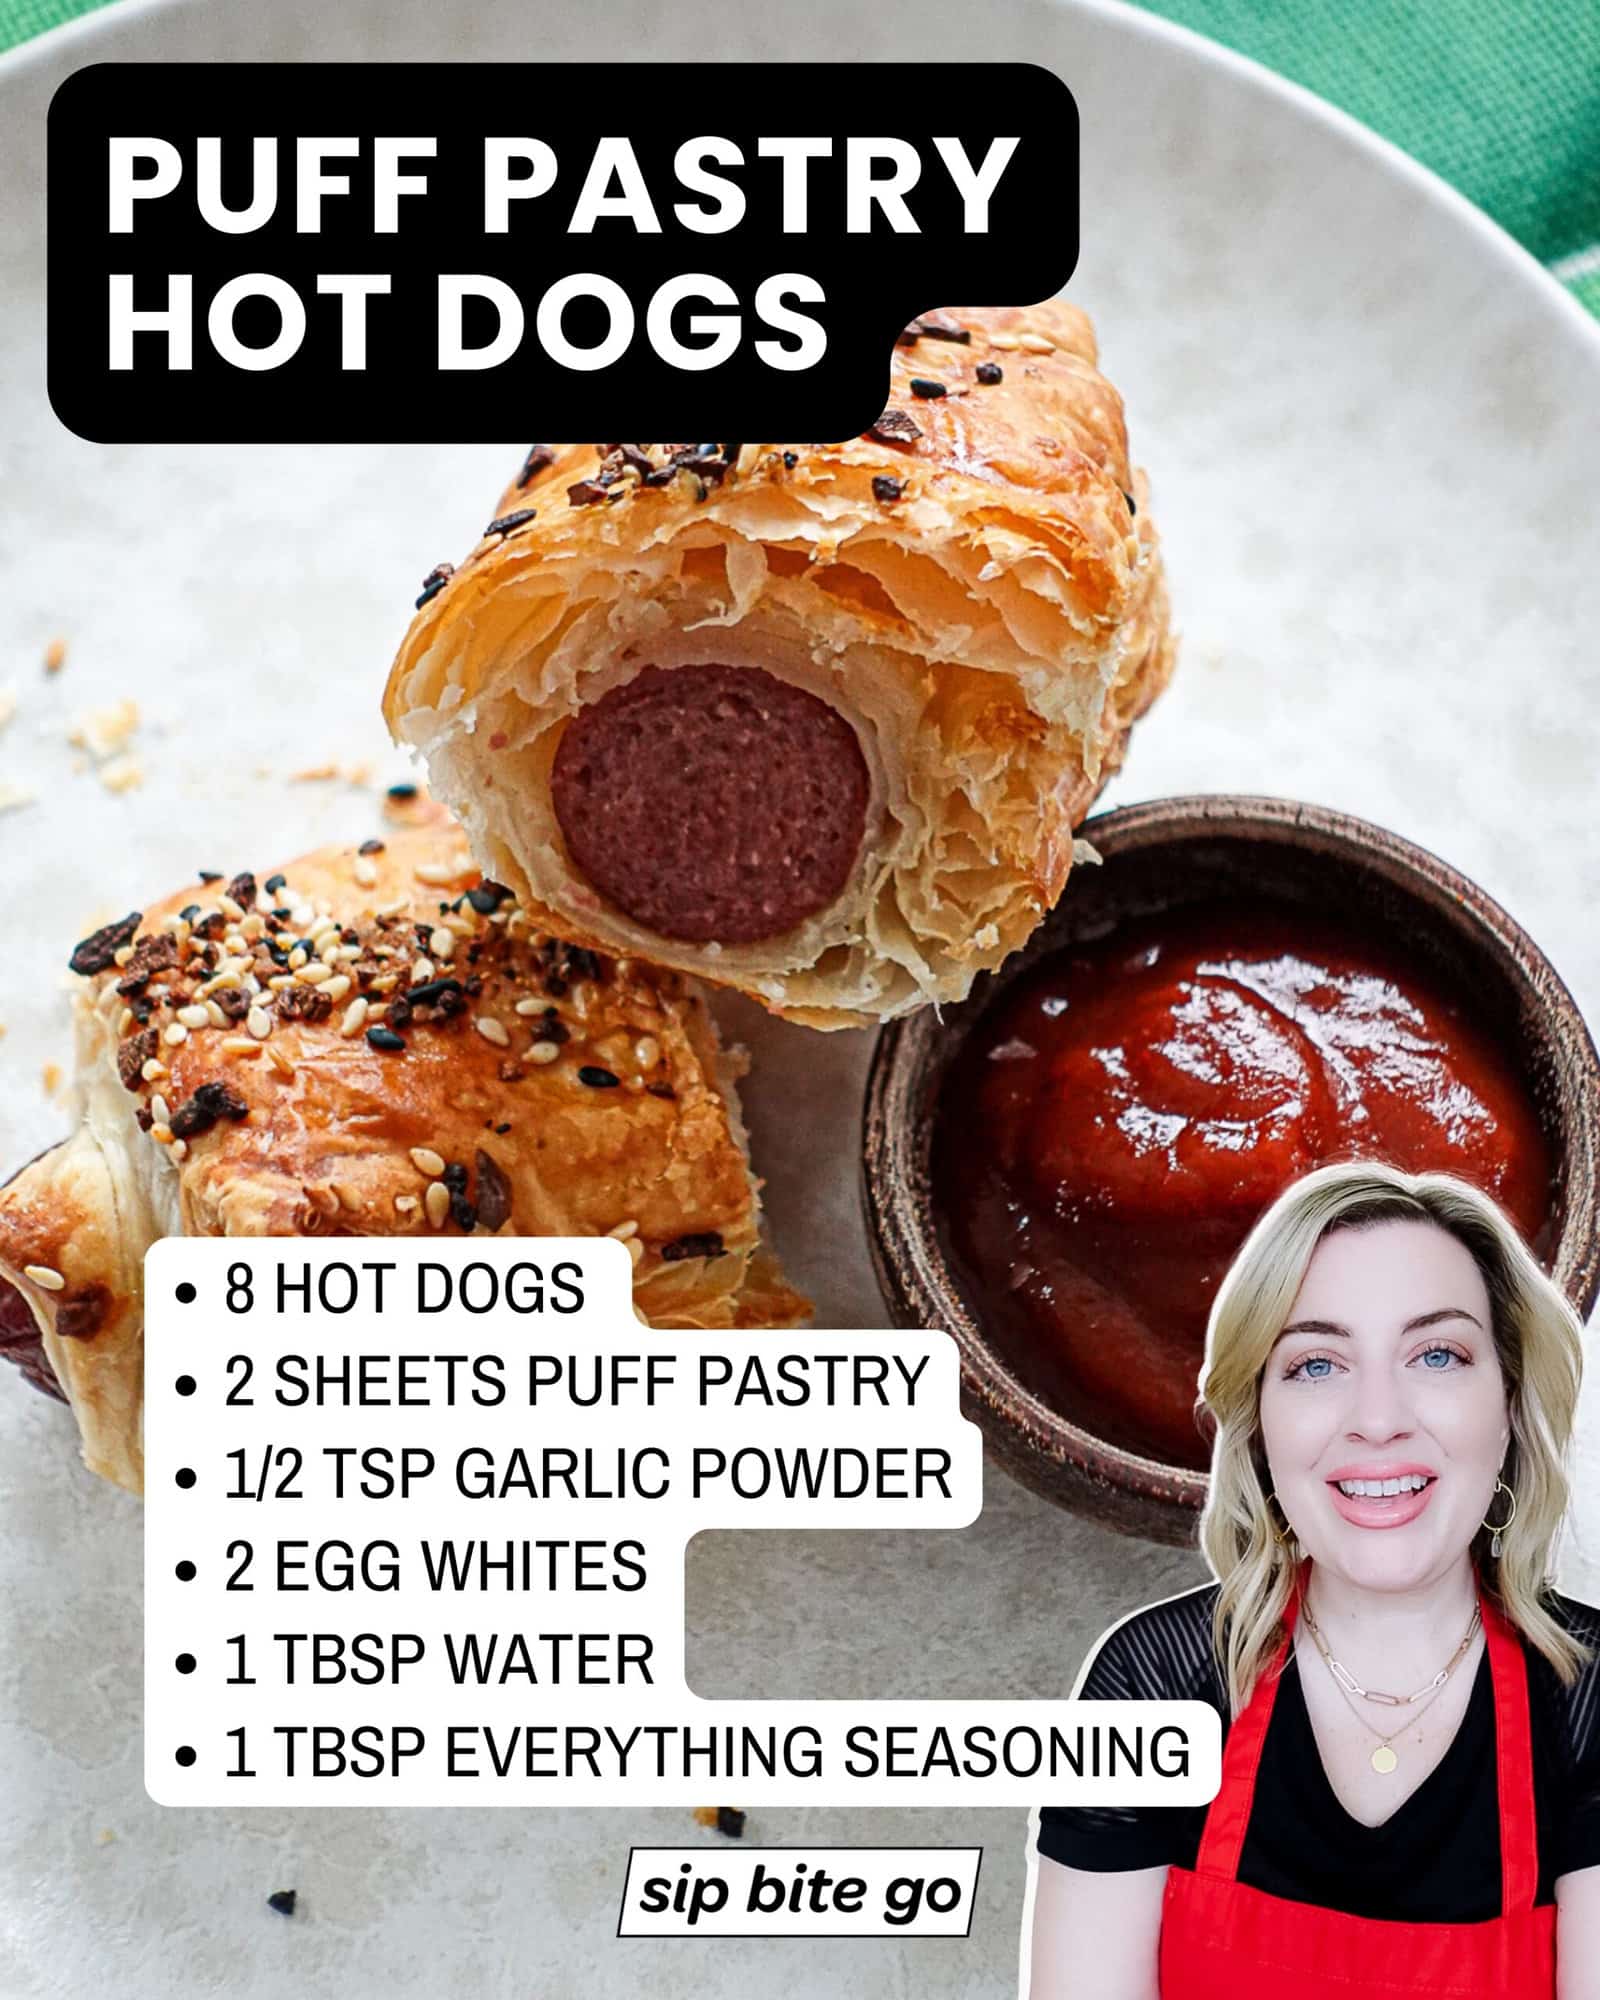 Puff Pastry Hot Dogs Recipe Ingredients